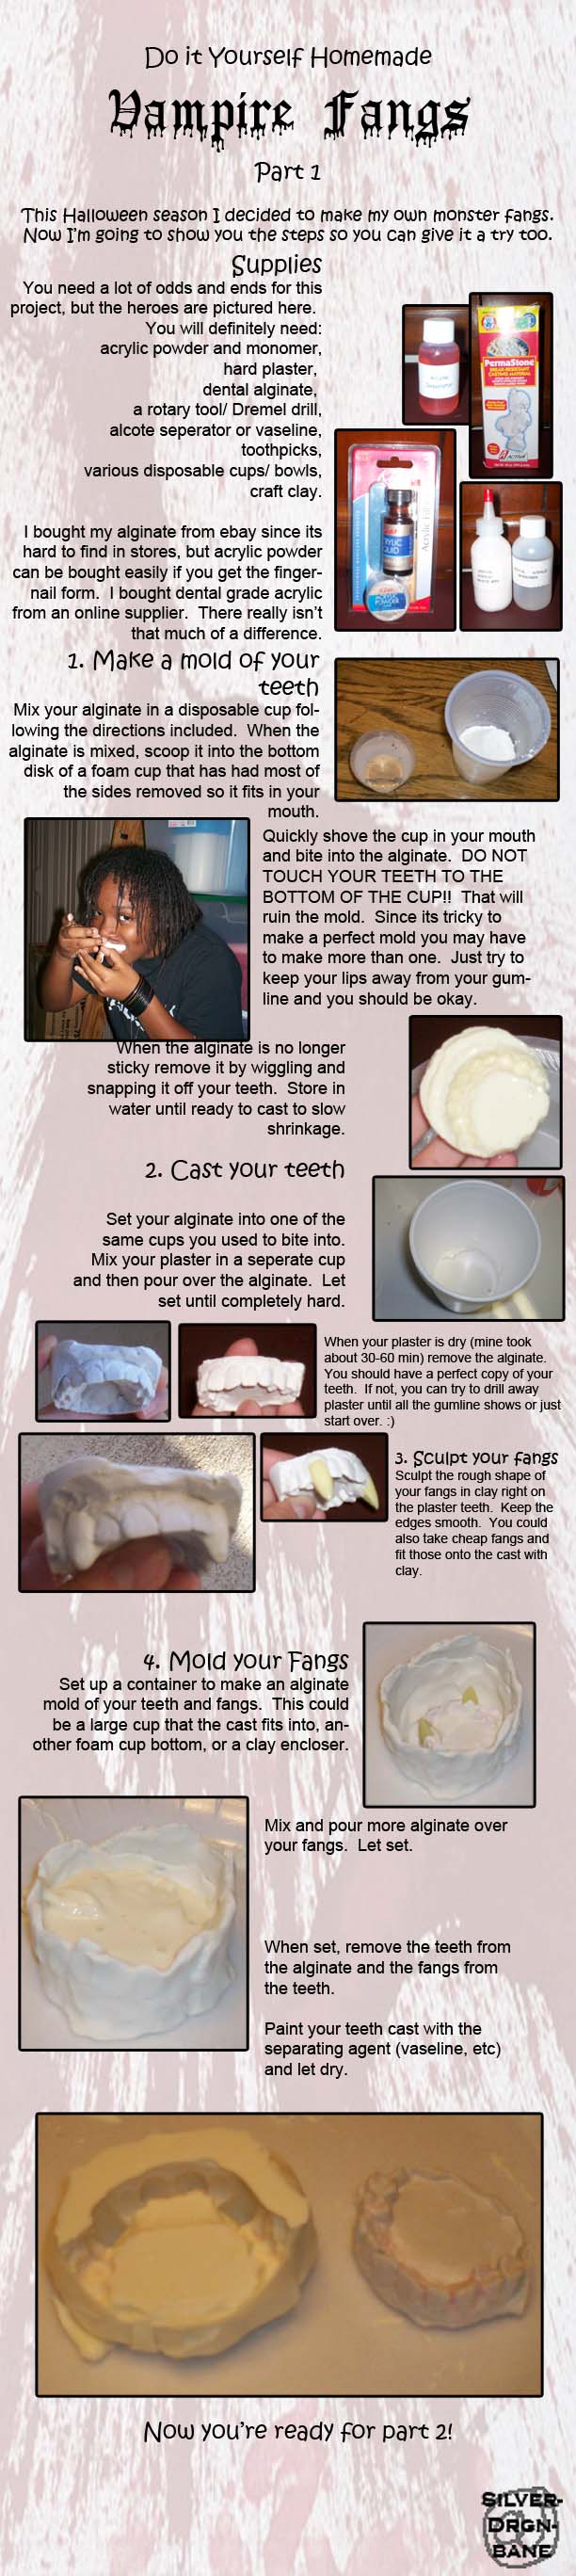 How to Mix Putty for Vampire Fangs